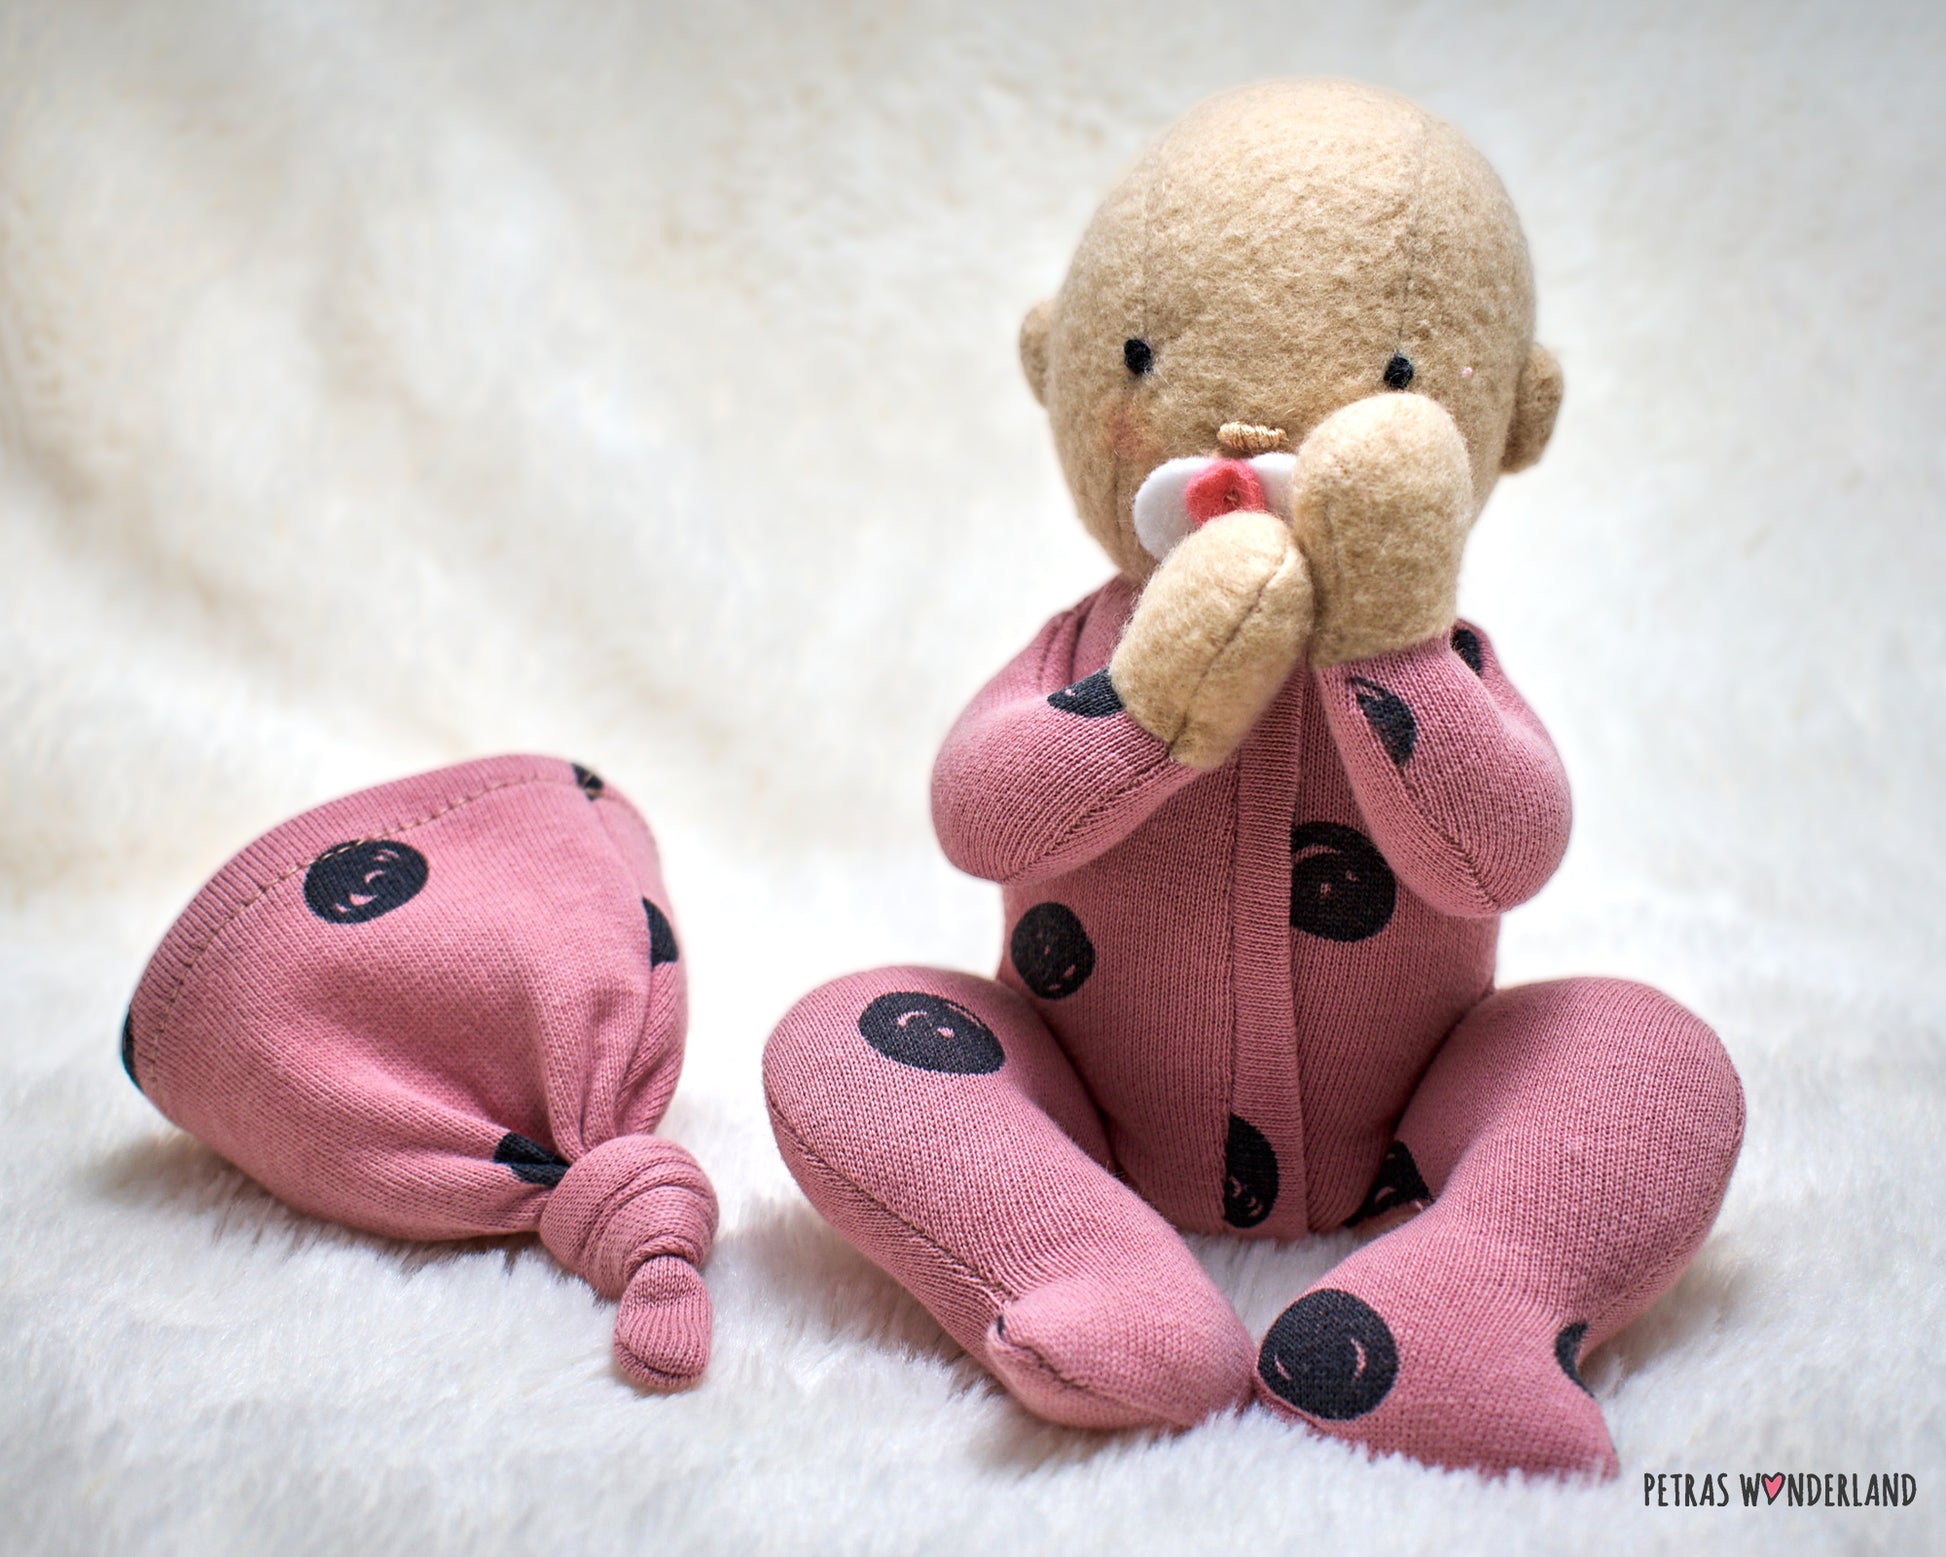 Newborn Baby Doll 8 Inch - PDF sewing pattern and tutorial 9